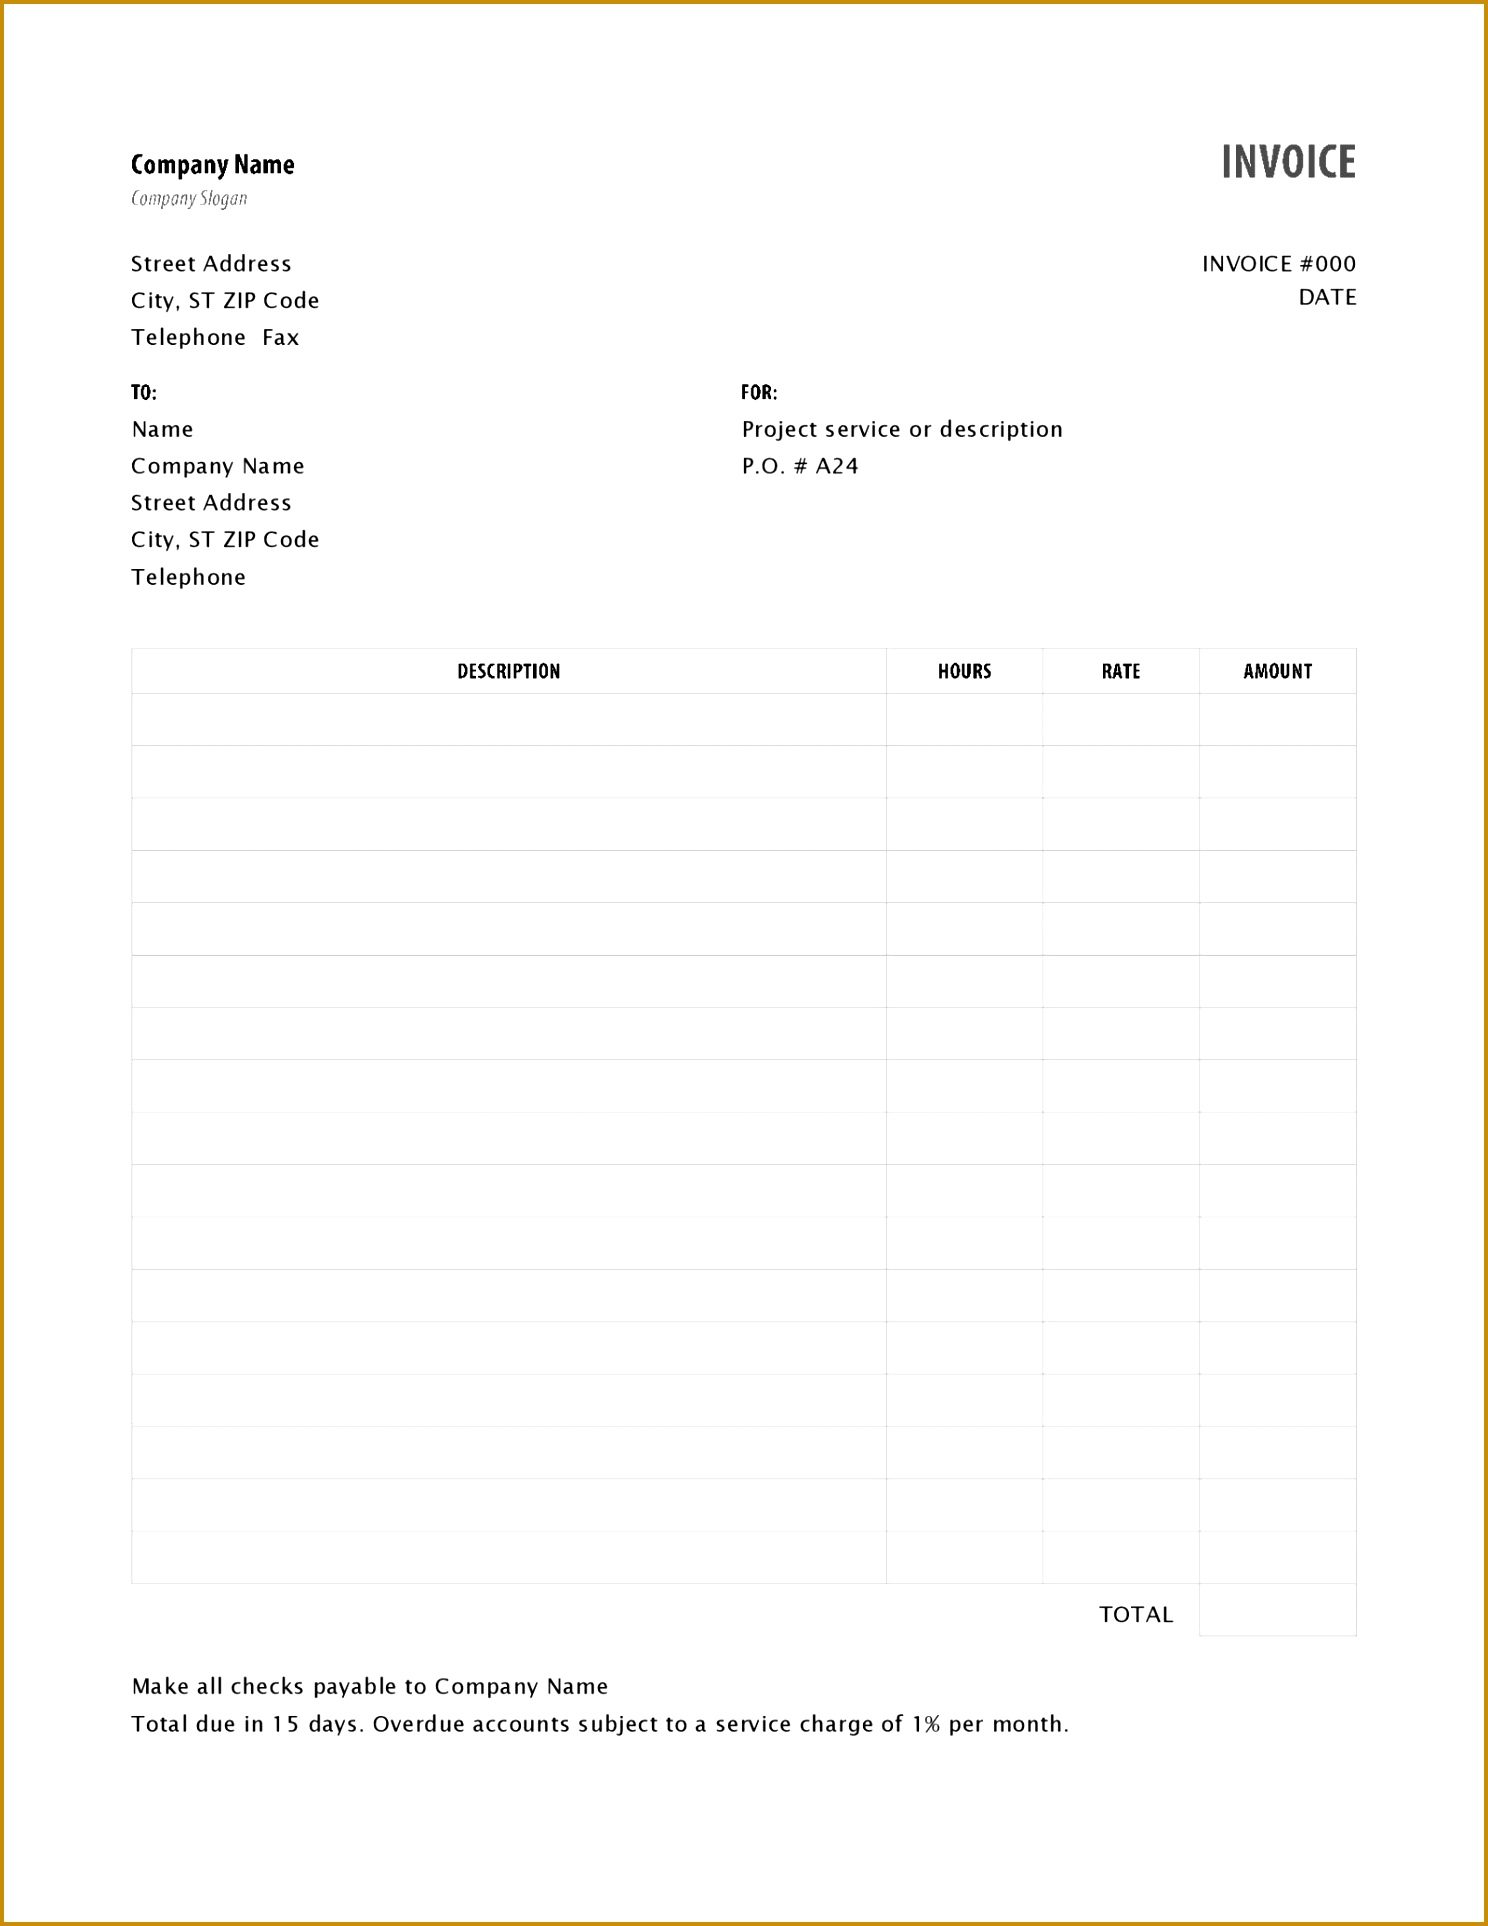 Invoice Printable Template Service With Hours And Rates Free Hvac Forms Basic Standard Formats 1600 19261488